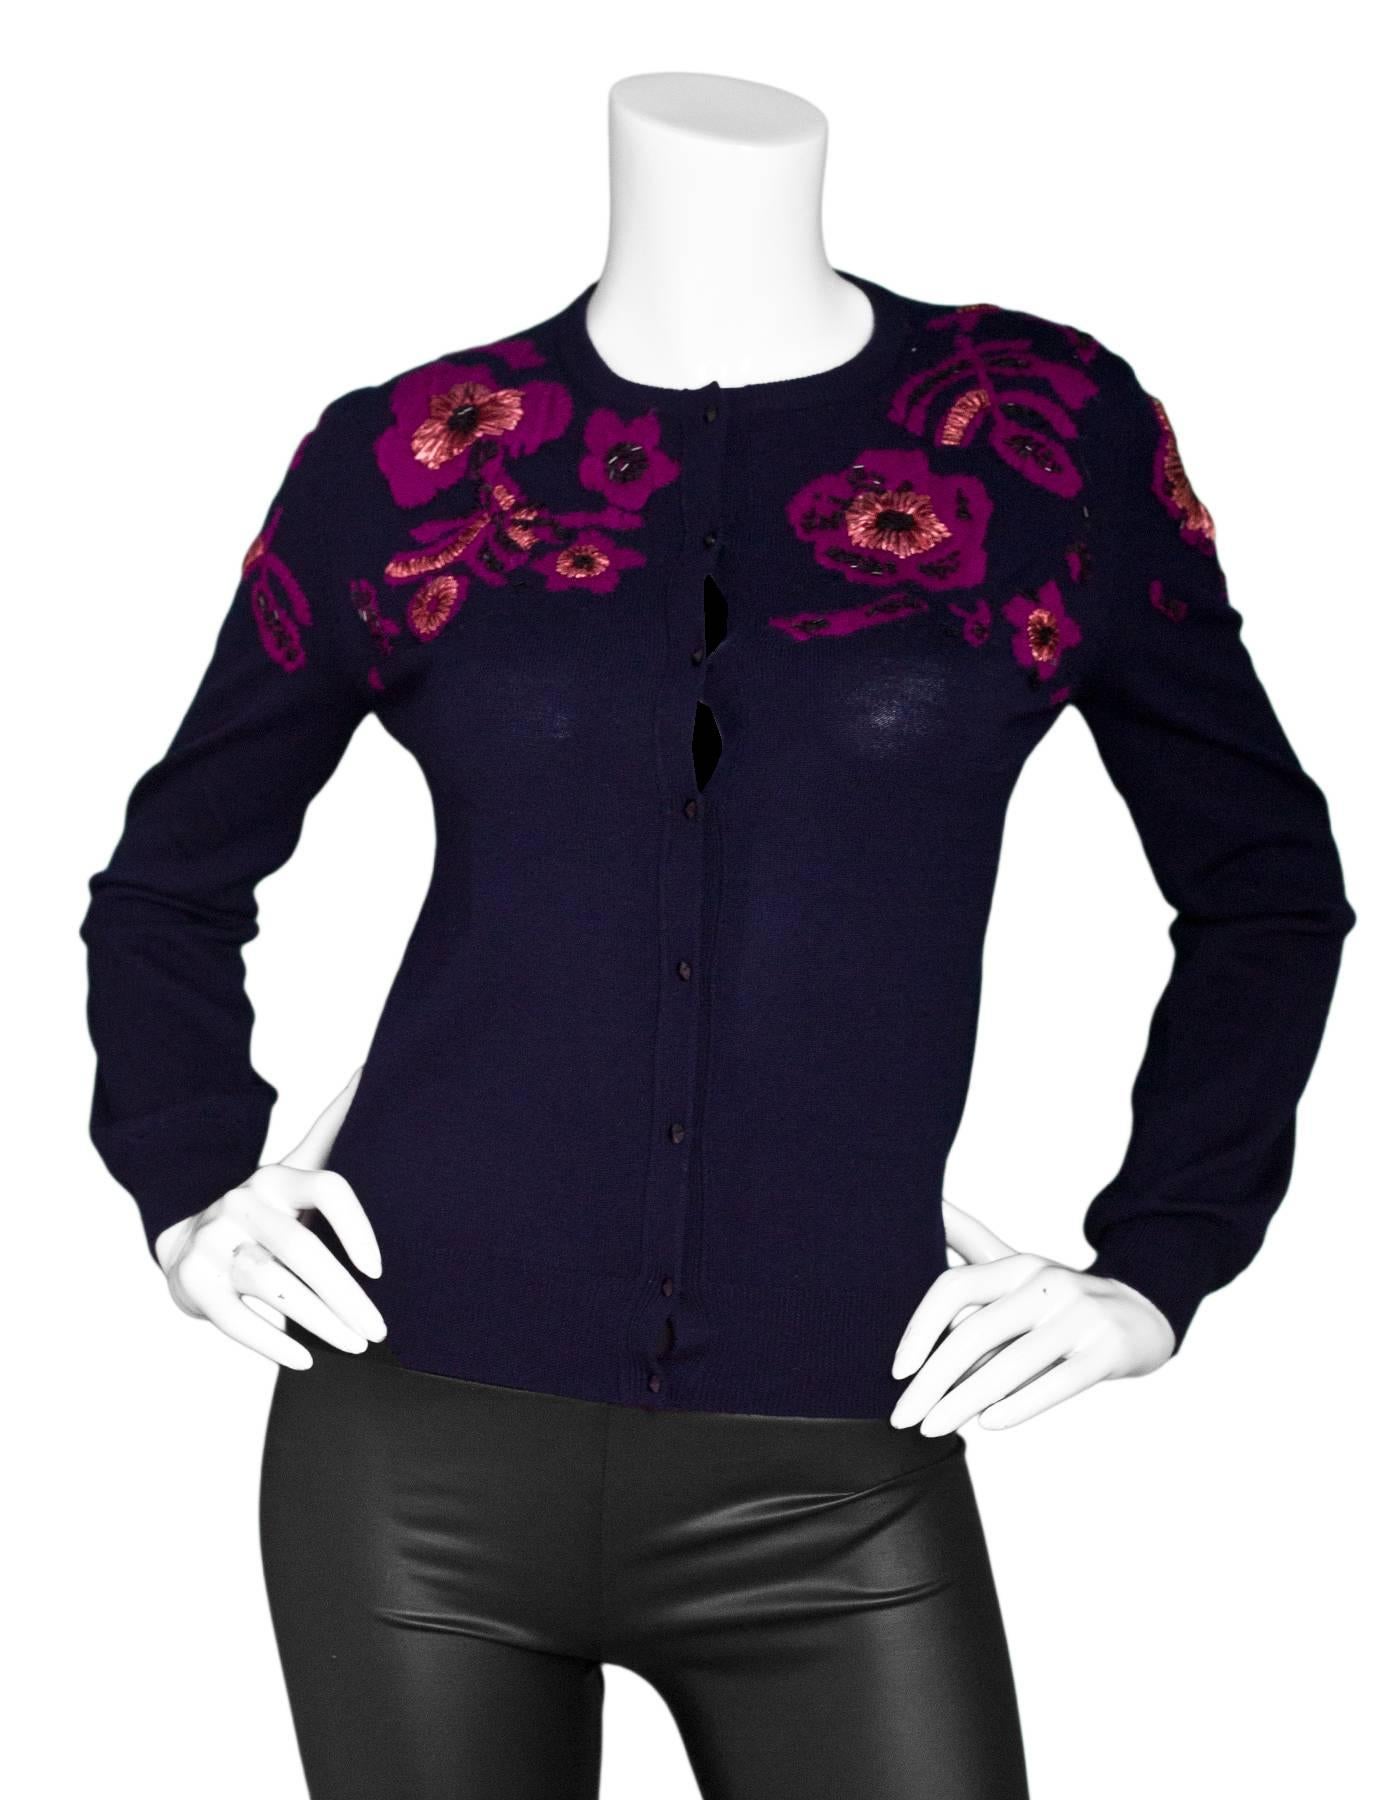 Oscar De La Renta Black Wool Beaded Floral Cardigan Sz Small

Features floral beaded applique's

Made In: Italy
Color: Black, purple
Composition: 83% wool, 12% cashmere
Closure/Opening: Front button closure
Overall Condition: Excellent pre-owned